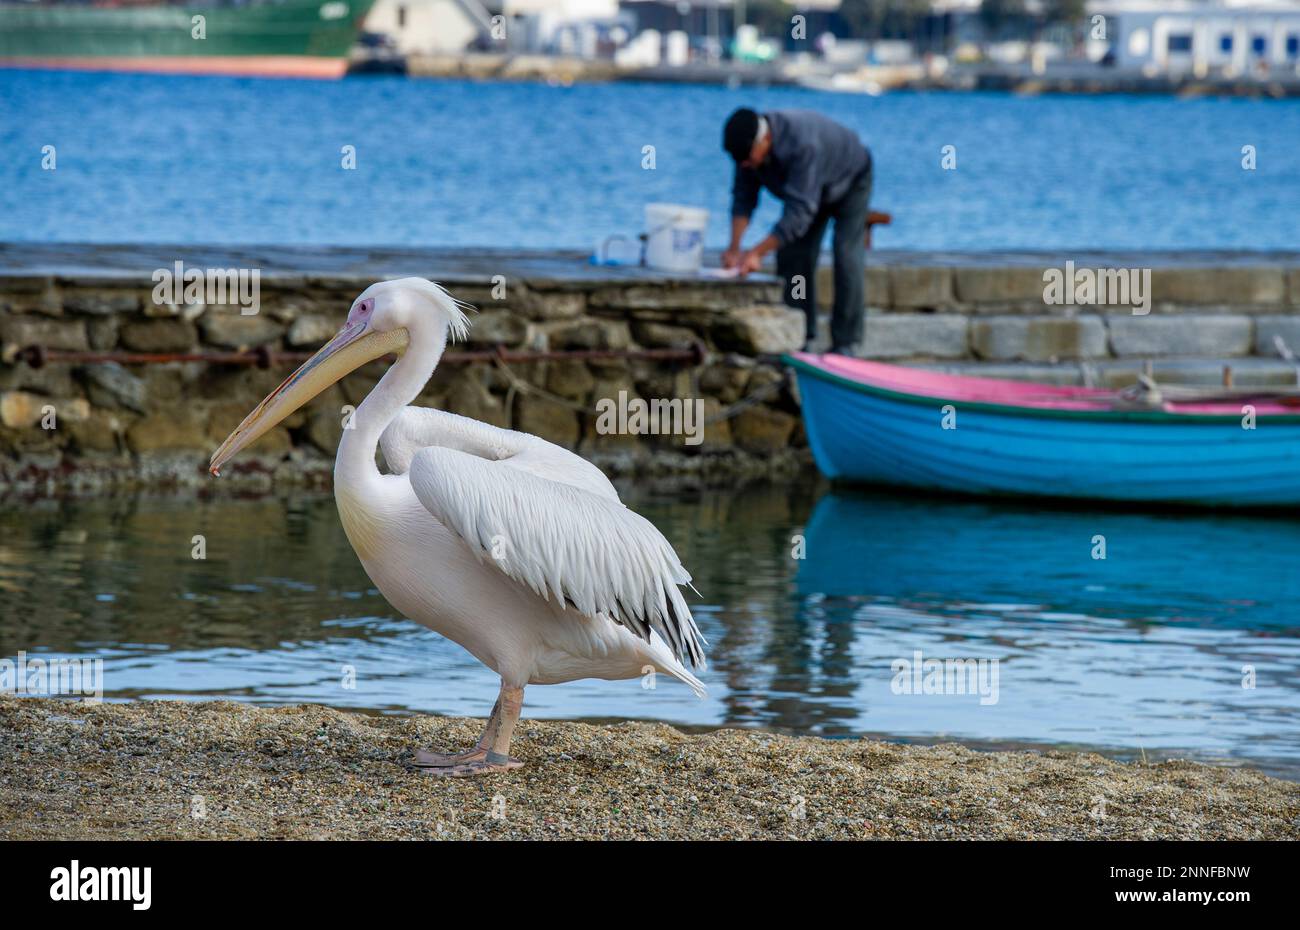 Europe, Greece, Mykonos. A pelican airs out its wings as a fisherman works in the background. Editorial use only. Stock Photo